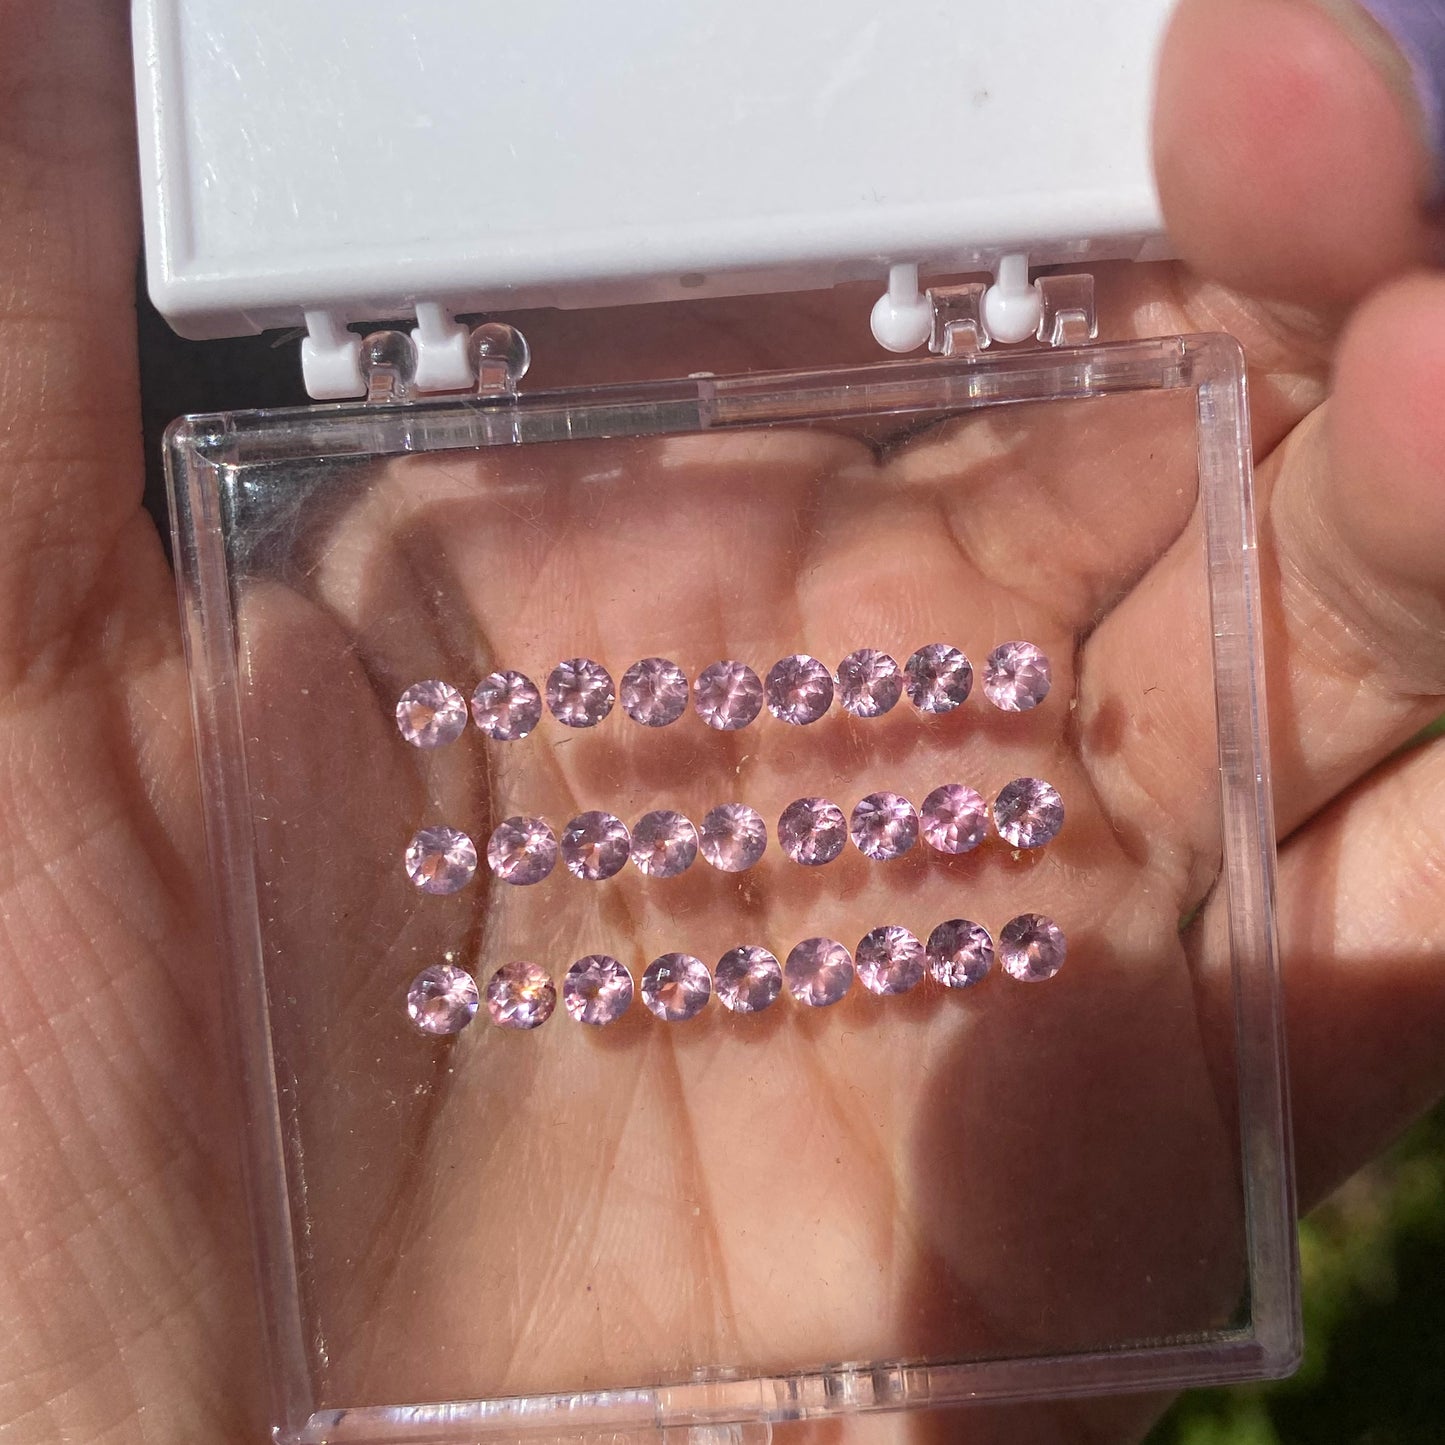 ADVANCE / SECTION Half Churumbela of Opalescent Pink Spinel, total value 8120 pesos 